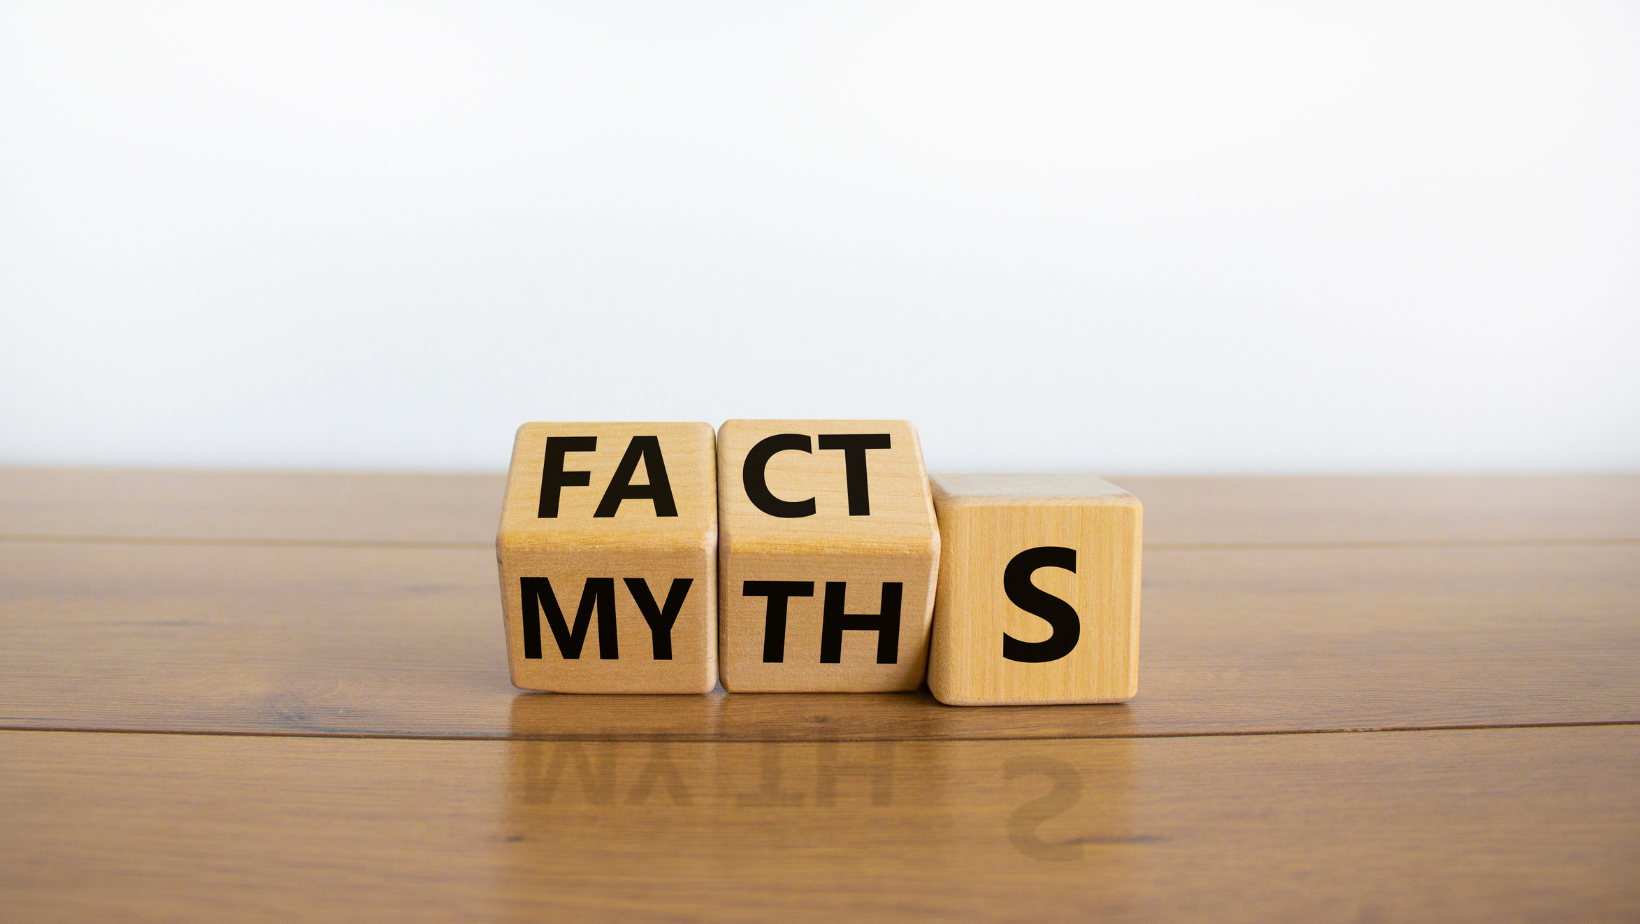 Common myths about full mouth dental implants and cost of dental implants